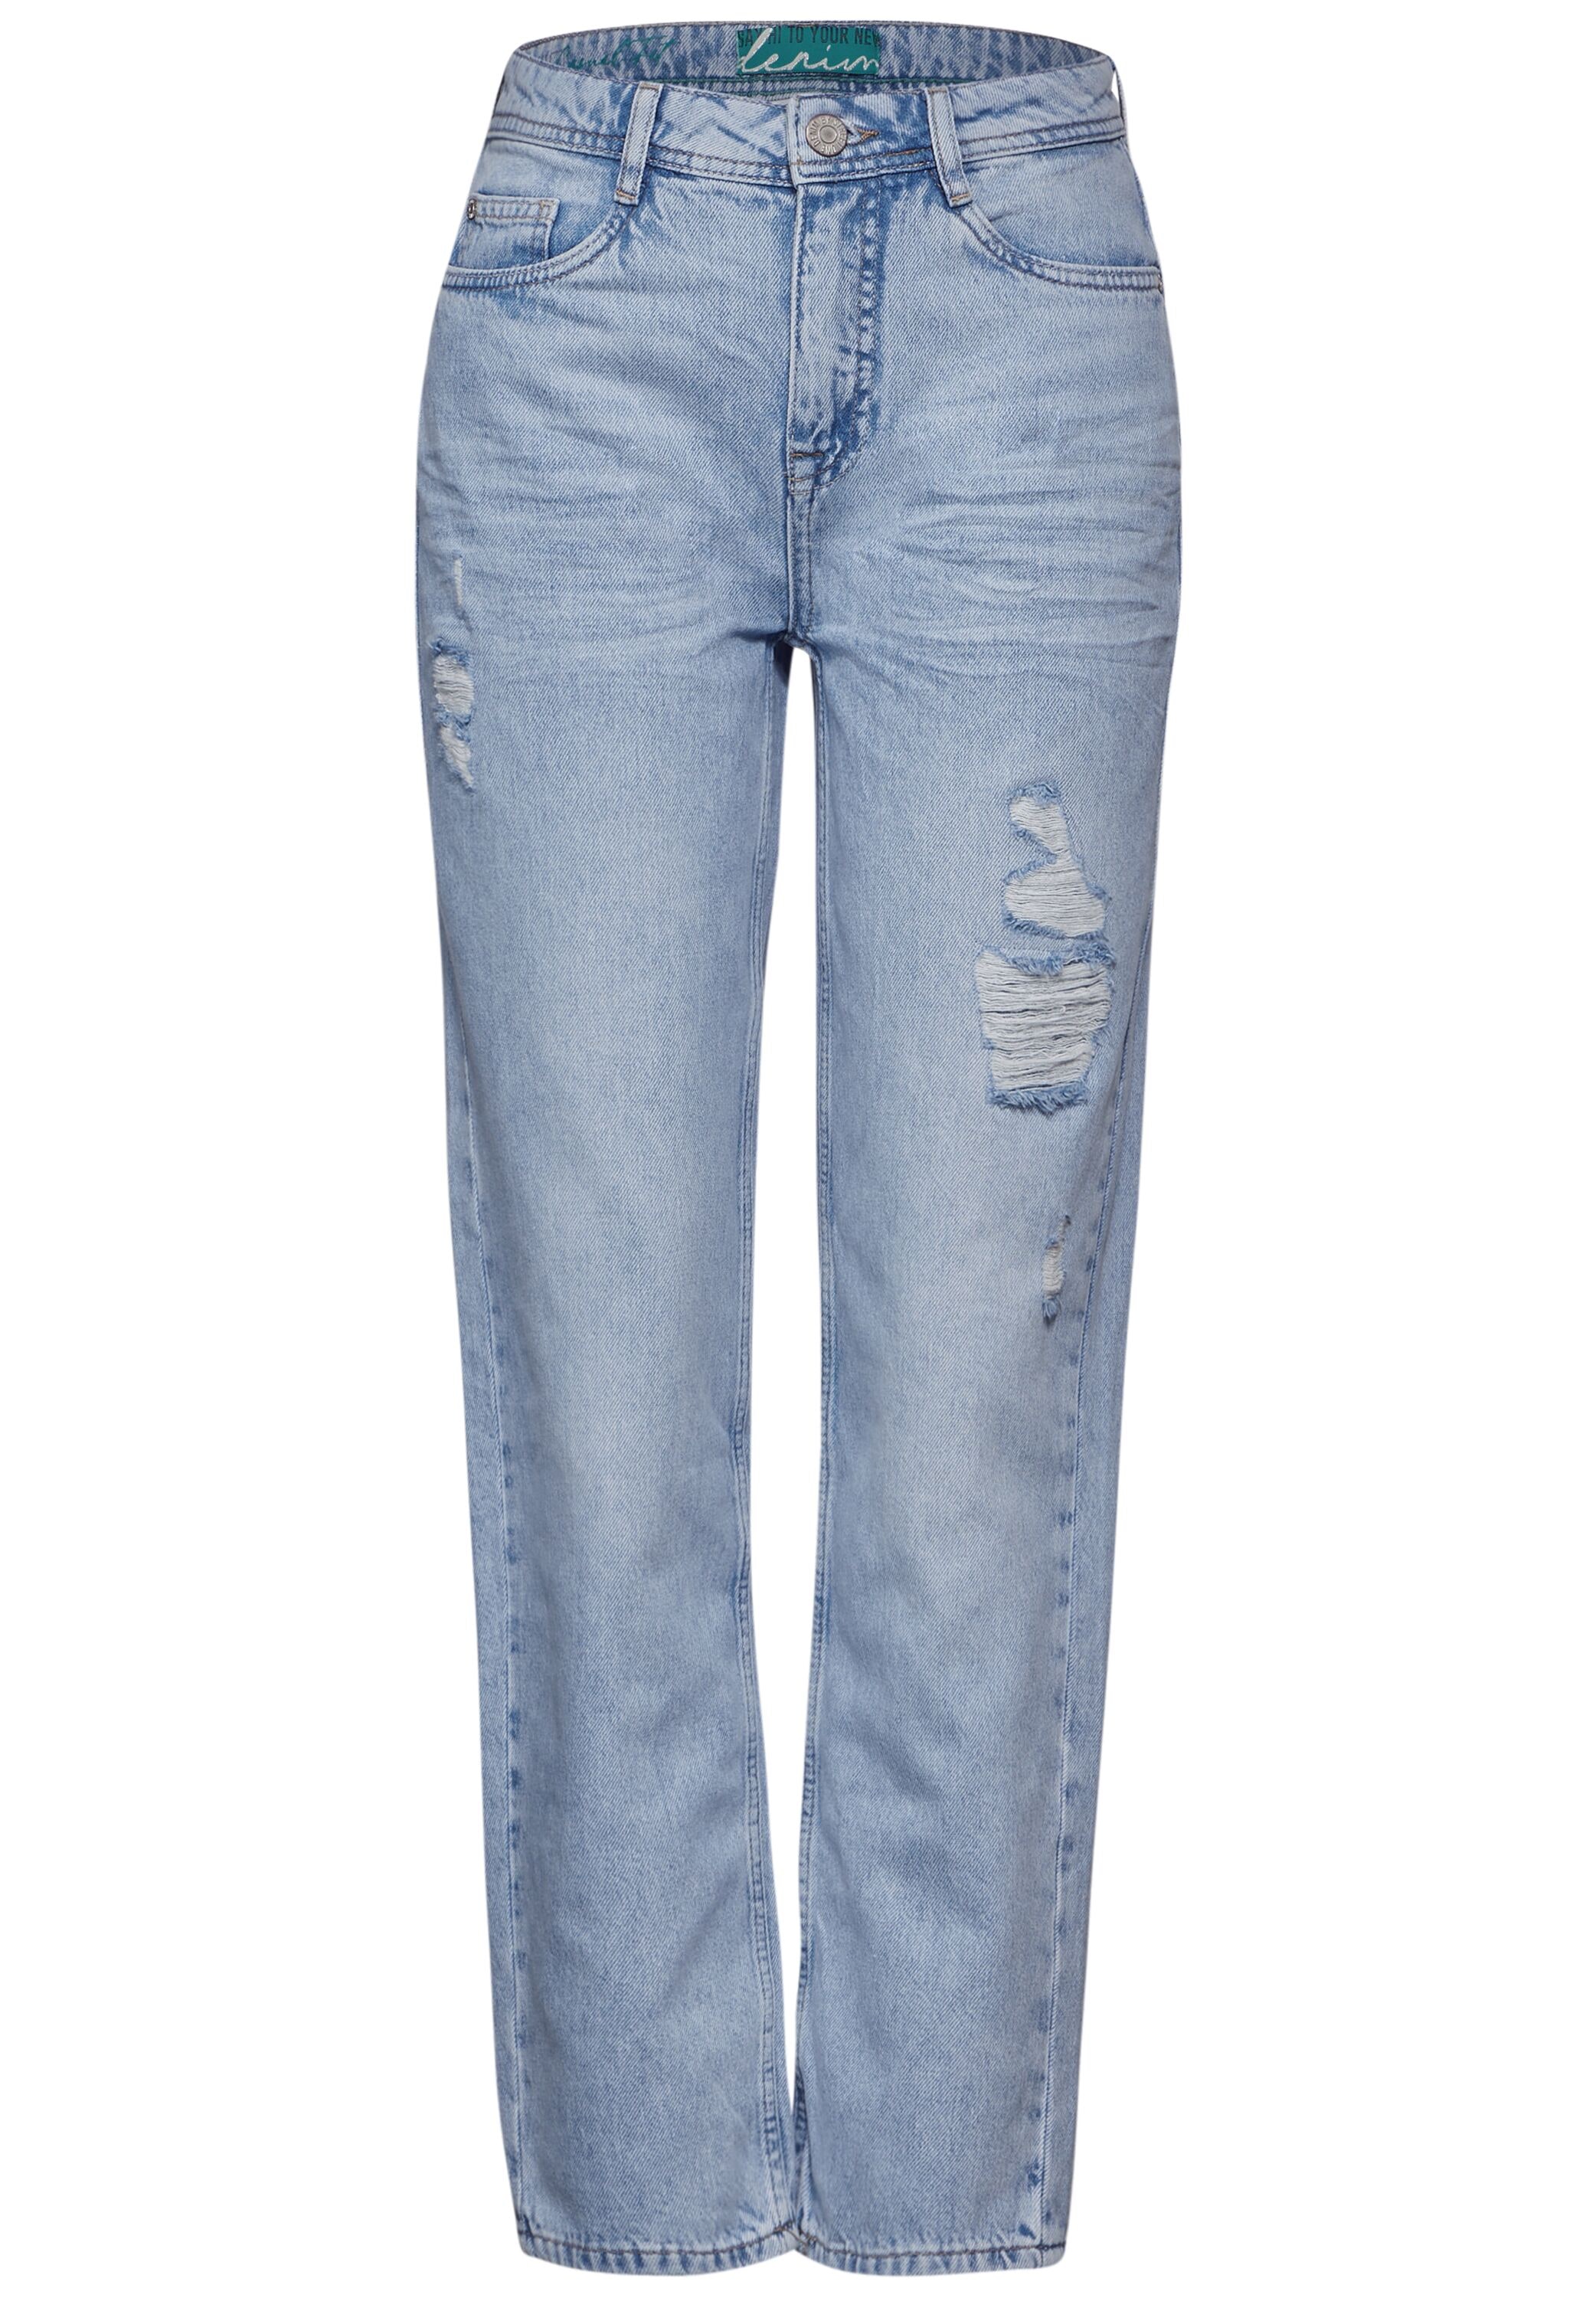 STREET ONE Straight-Jeans, mit Löcher-Used-Look